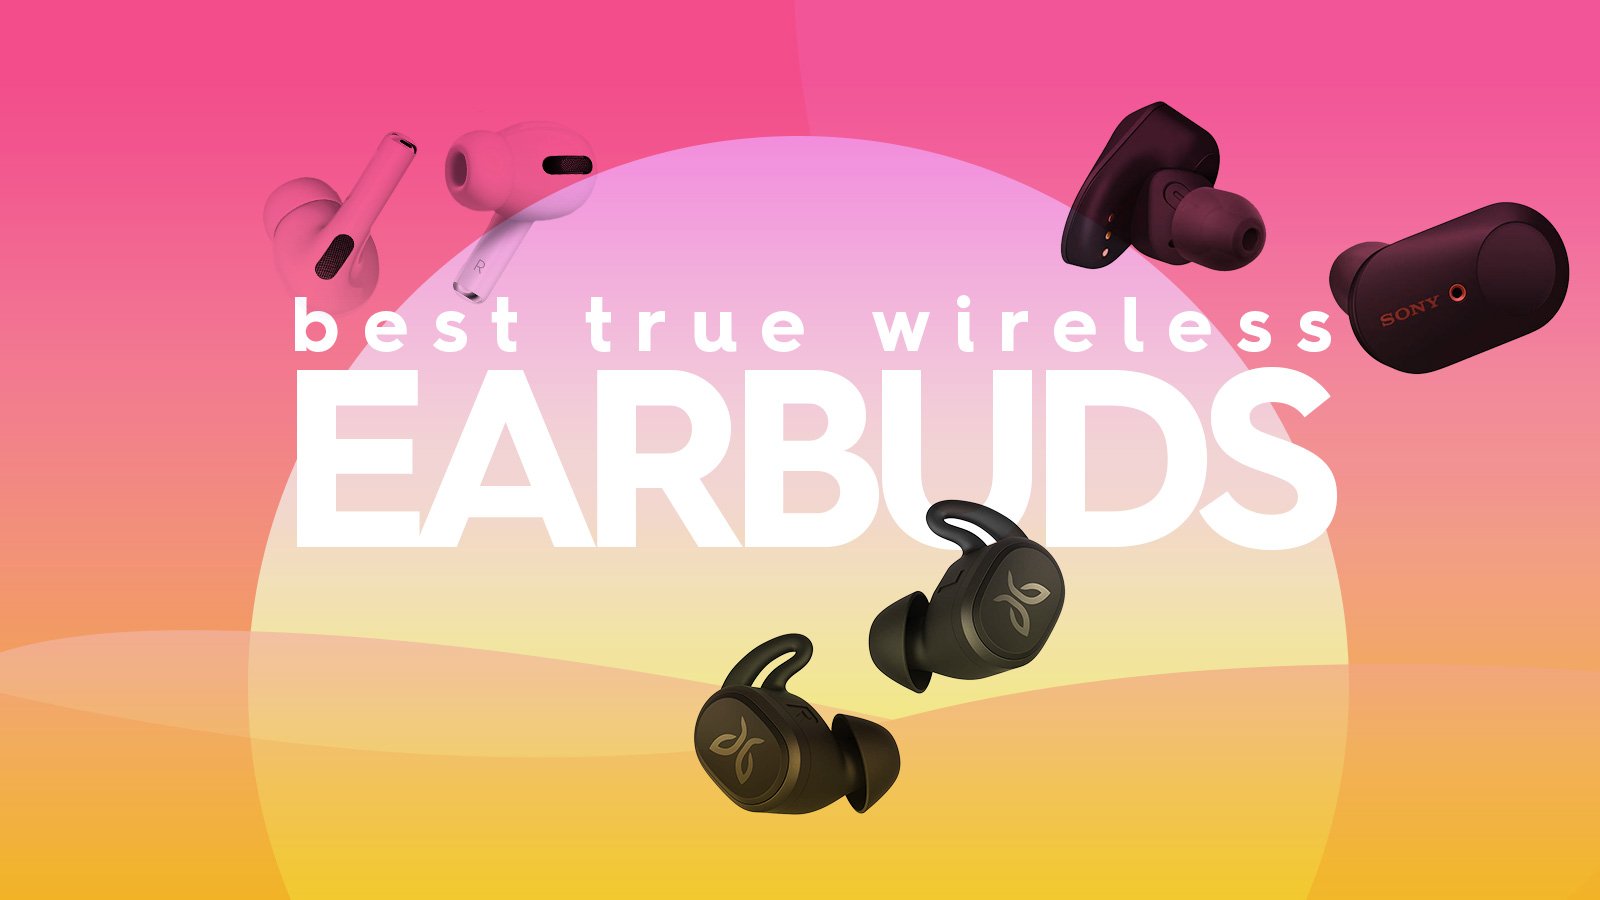 Top 10 Wireless Earbuds With Mic Models For Best Voice And Calls